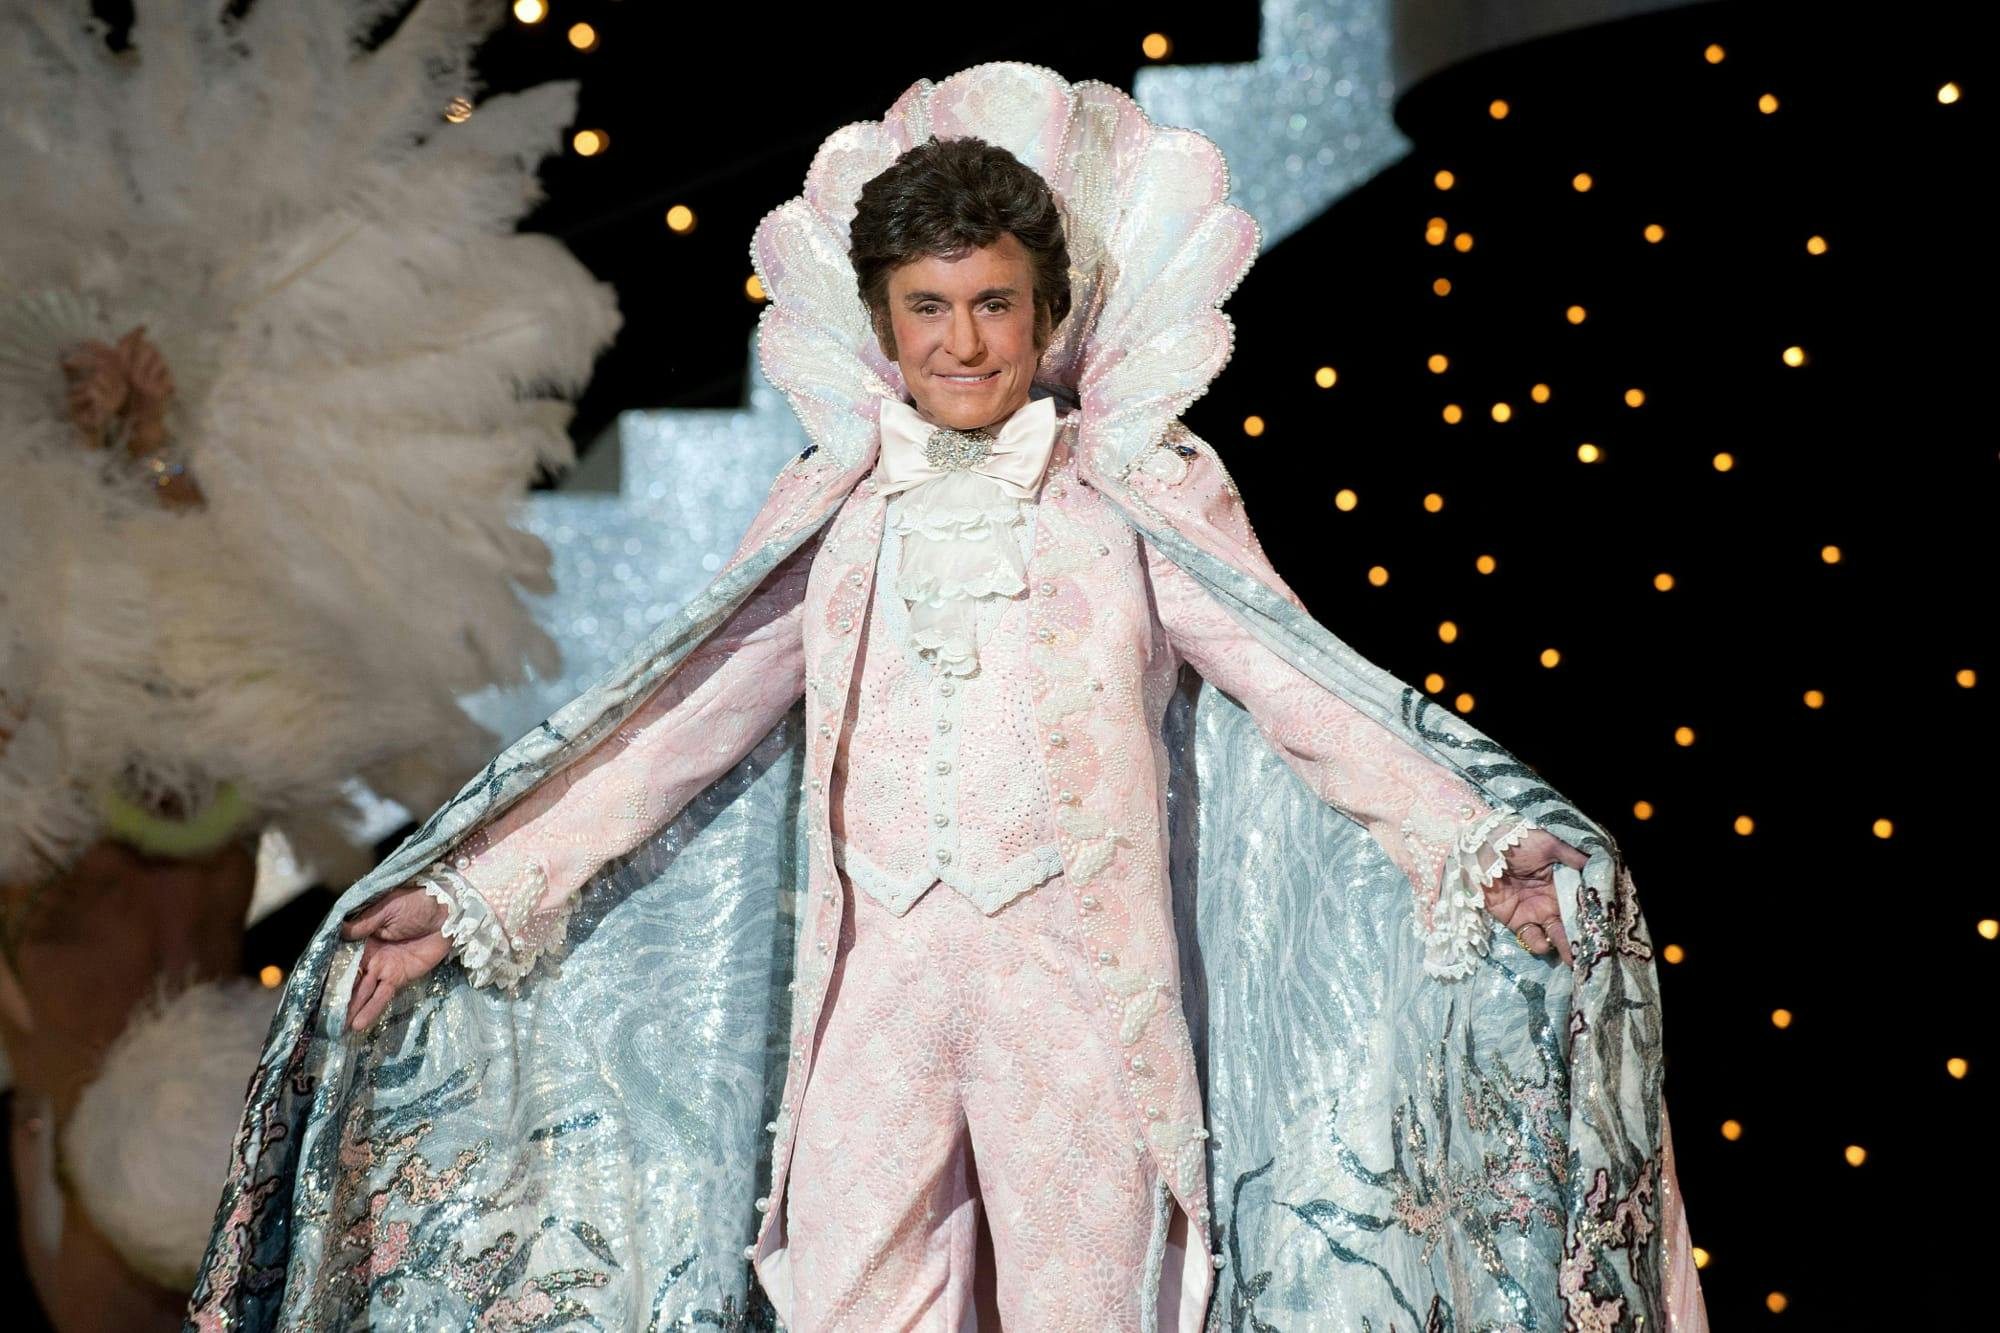 Liberace (Michael Douglas) in Behind the Candelabra wears an ornate pink costume and collar, complete with a light blue cape.